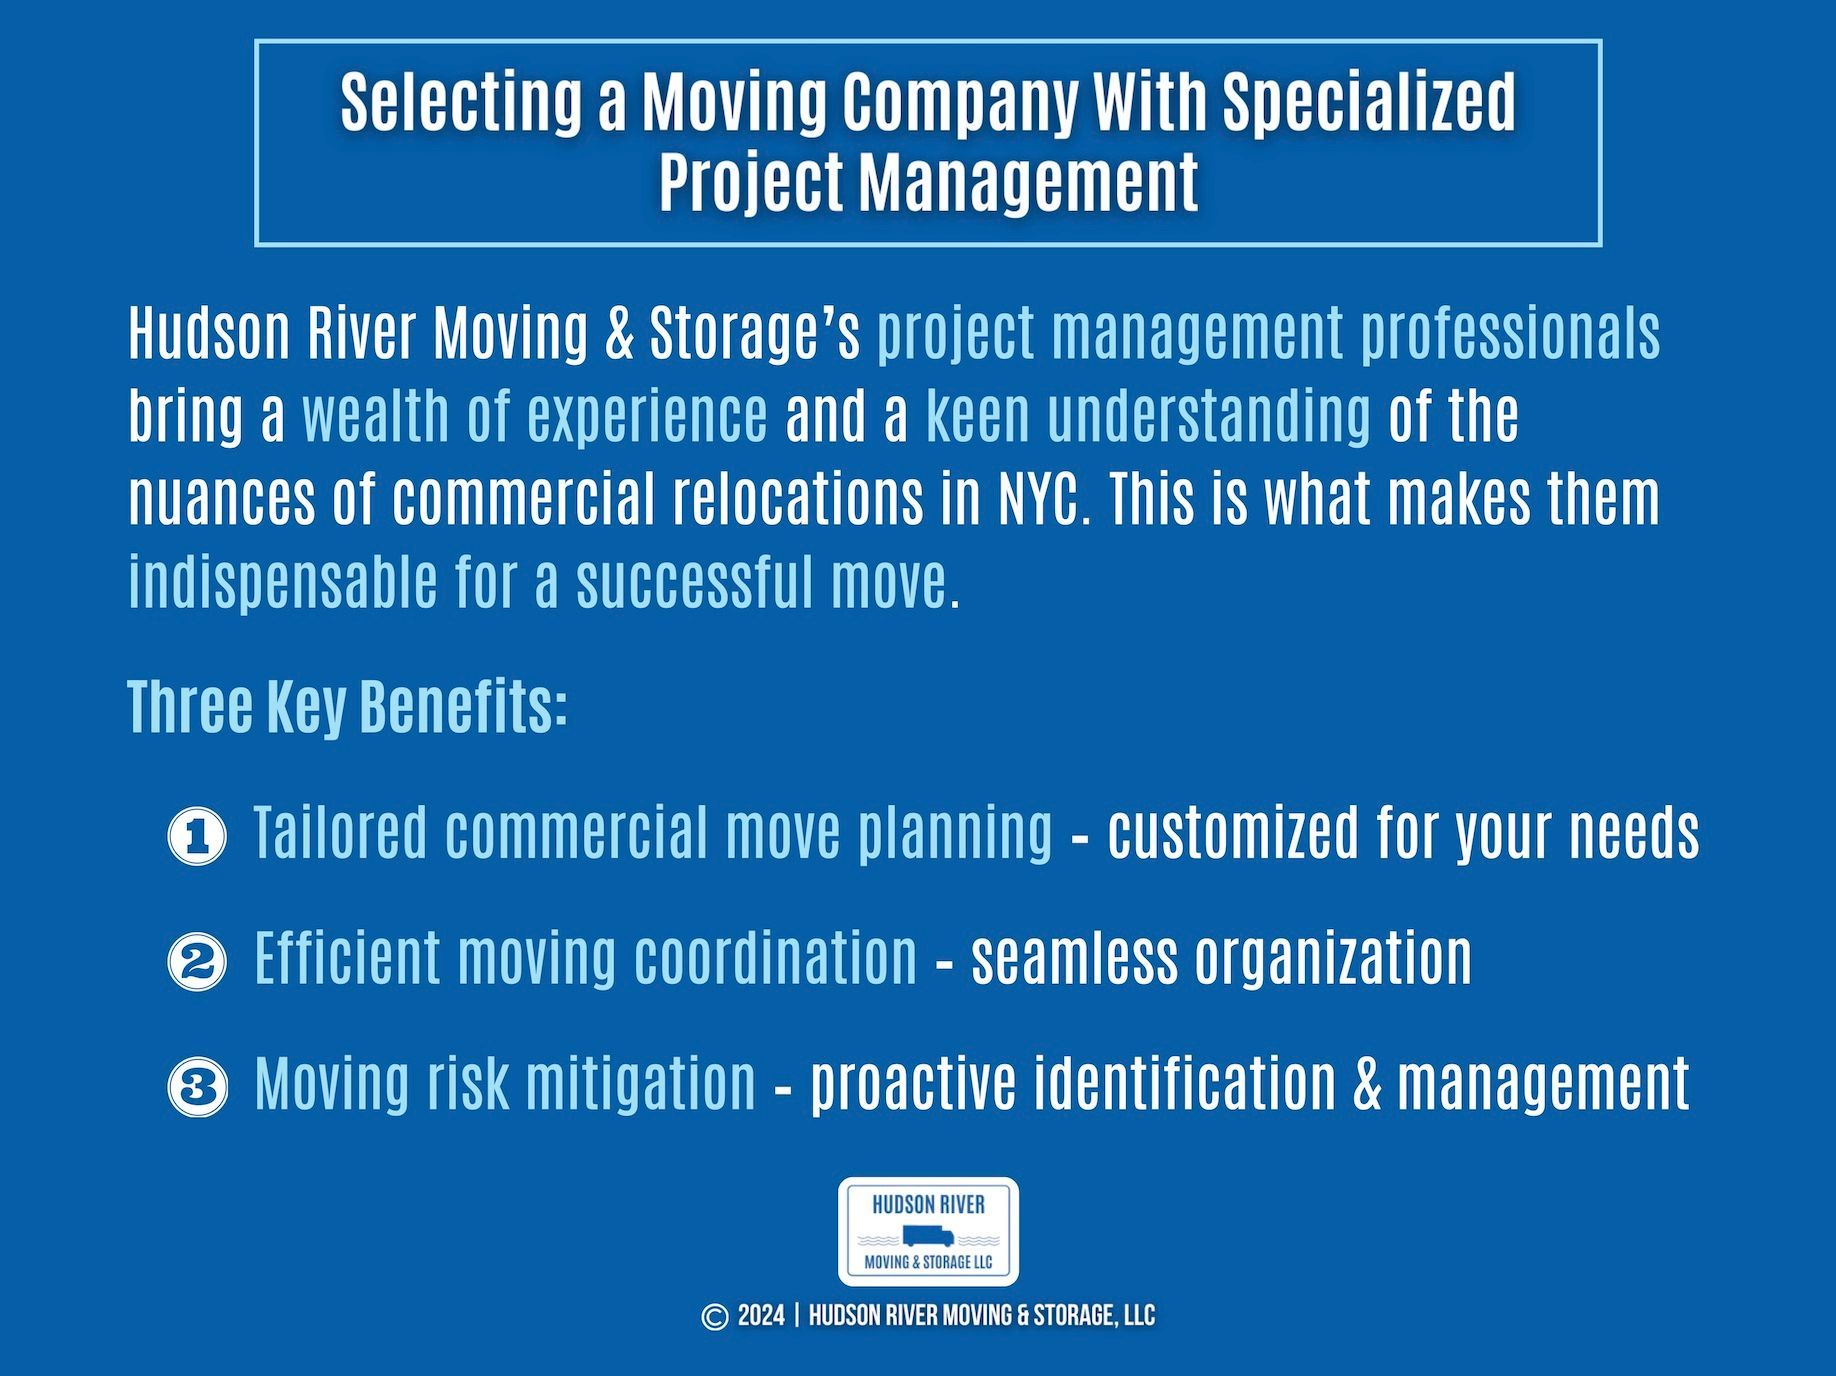 Text about choosing a specialized moving company in NYC with project management services, such as Hudson River Moving & Storage.